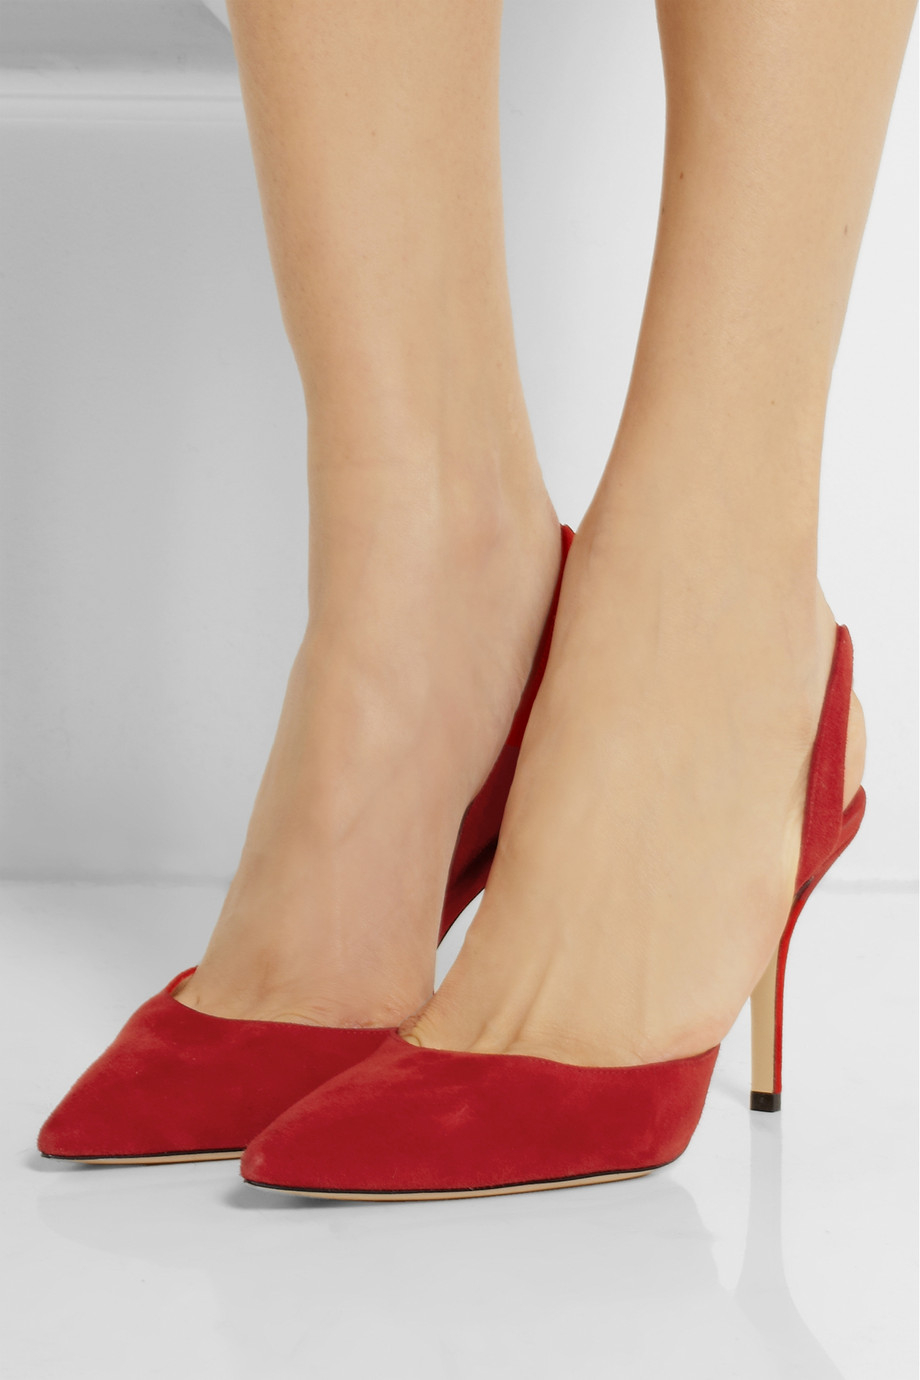 Lyst - Paul Andrew Suede Slingbacks in Red